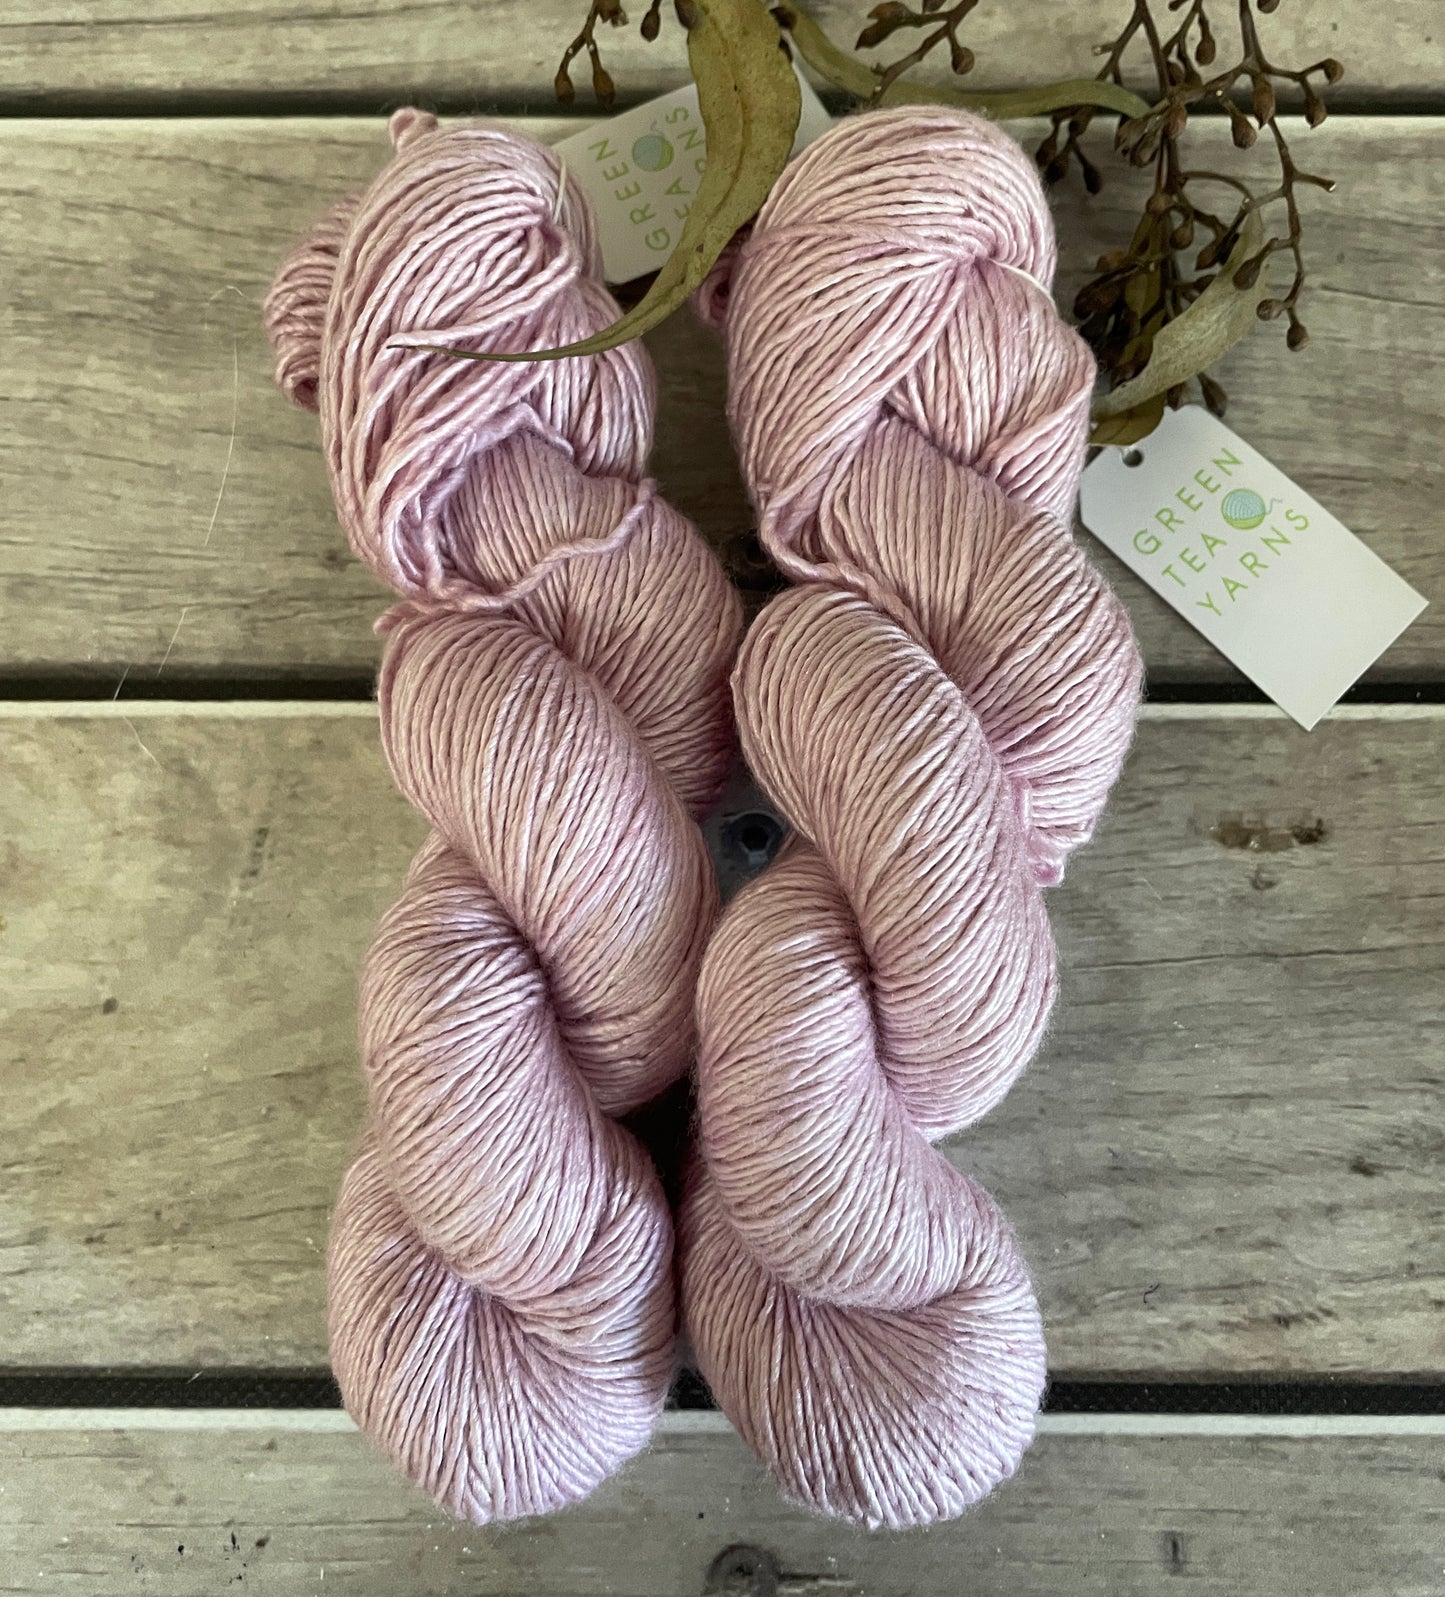 Soft Rose - 8 ply in Mulberry silk and Merino singles yarn - Osmanthus 8